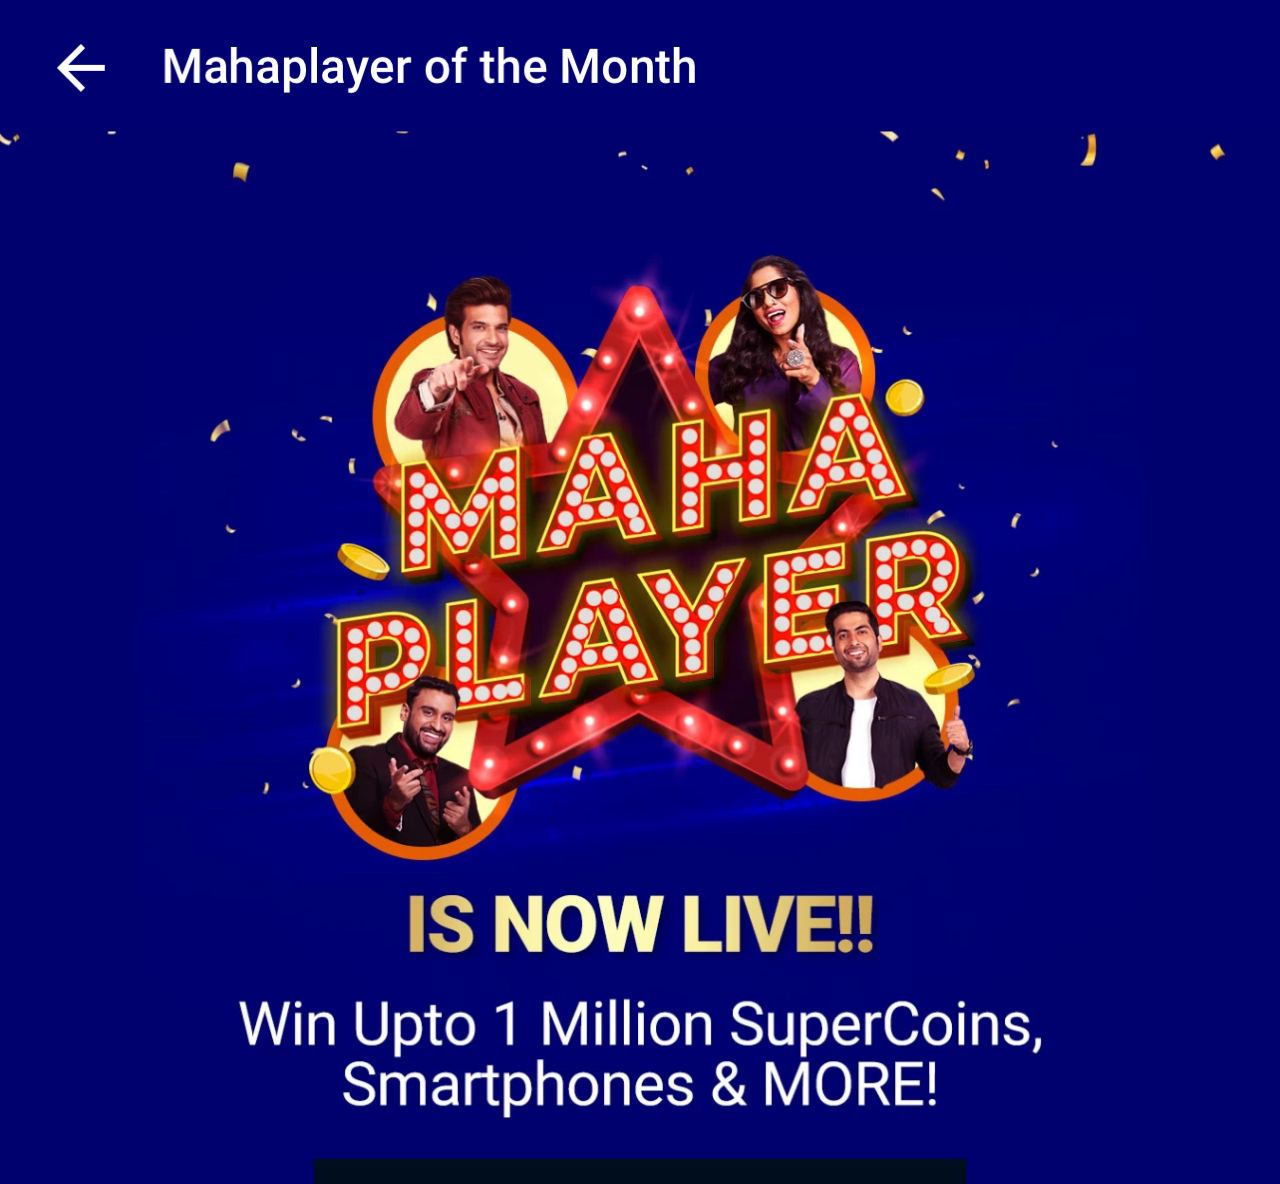 Flipkart MahaPlayer - Play Daily 3 Games & Get Upto 1 Lakh Supercoins/Oppo Phone